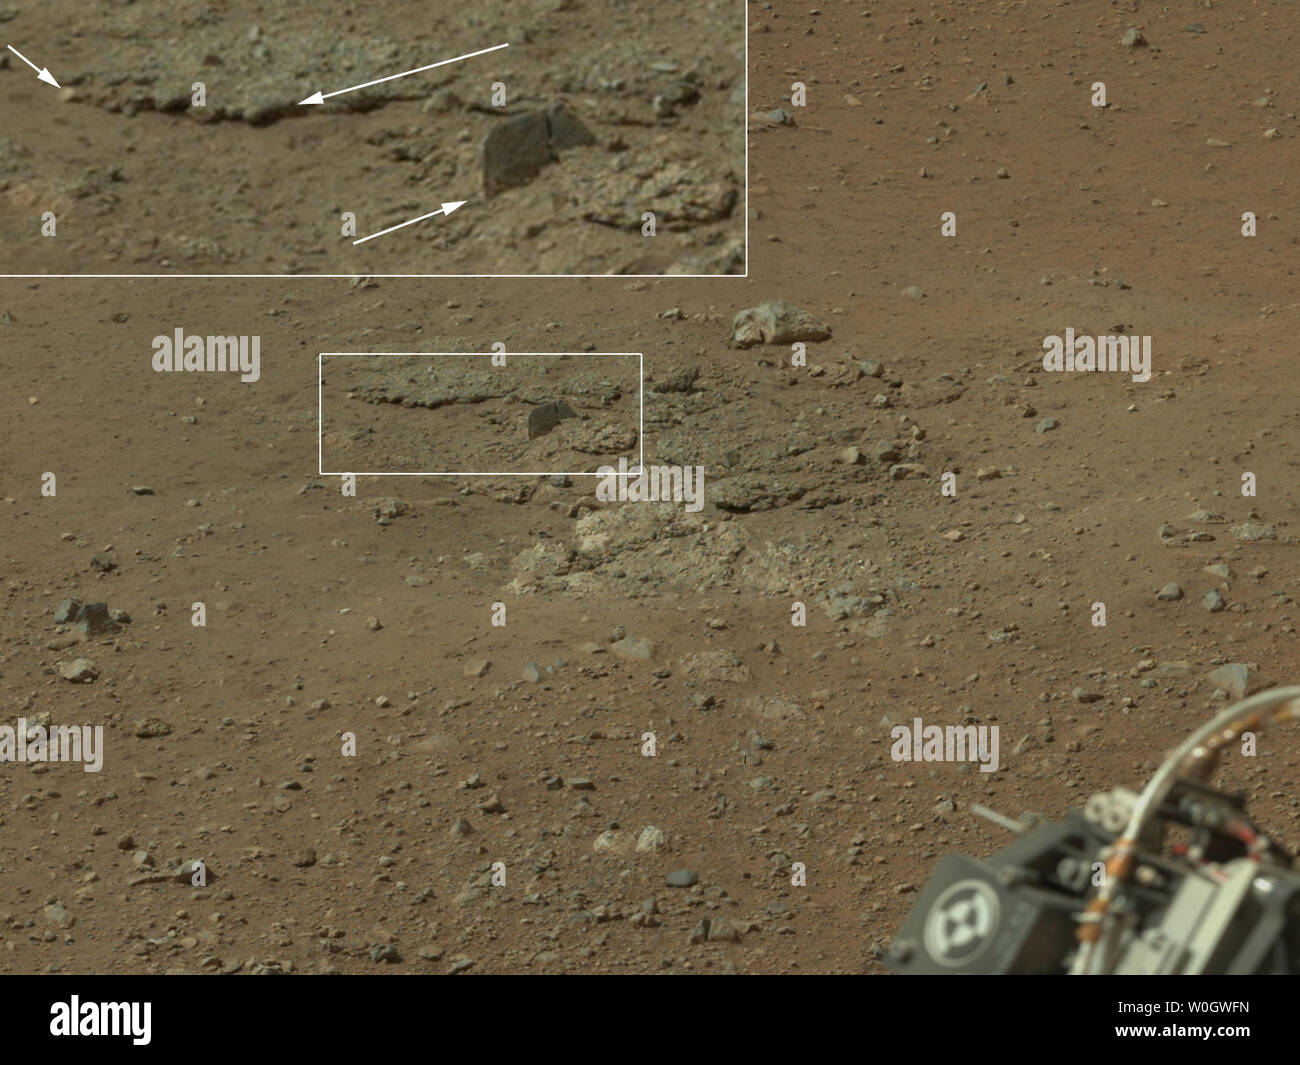 This color image from NASA's Curiosity rover shows an area excavated by the blast of the Mars Science Laboratory's descent stage rocket engines. This is part of a larger, high-resolution color mosaic made from images obtained by Curiosity's Mast Camera on August 9, 2012 EDT.   Shown in the inset in the figure are pebbles up to 1.25 inches (about 3 centimeters) across (upper two arrows) and a larger clast 4 inches (11.5 centimeters) long protruding up by about 2 inches (10 centimeters) from the layer in which it is embedded.   UPI/NASA/JPL-Caltech/MSSS Stock Photo